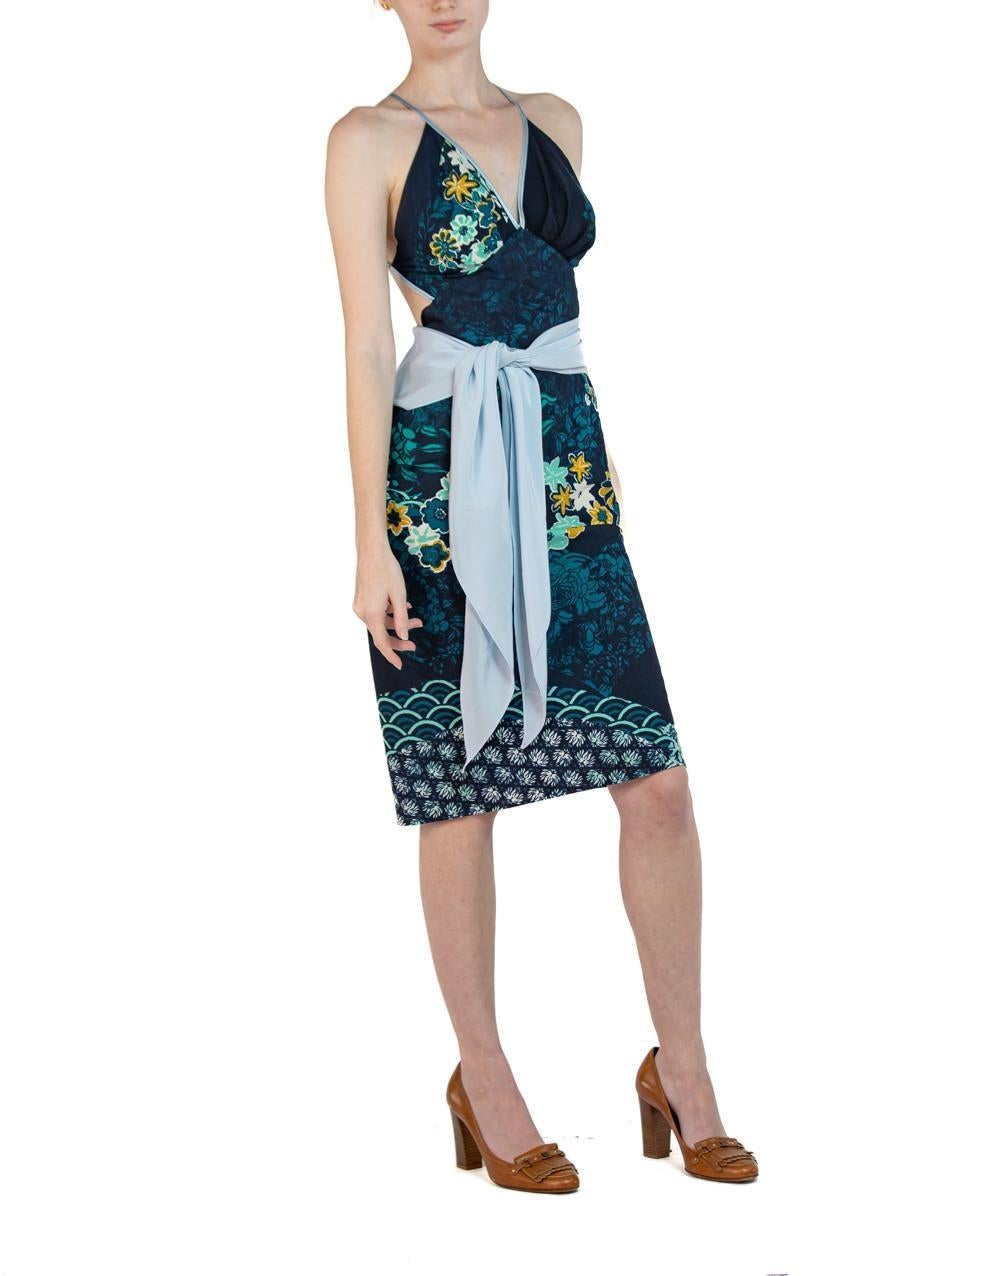 Women's MORPHEW COLLECTION Indigo & Yellow Silk Sagittarius One Scarf Dress Made From A For Sale